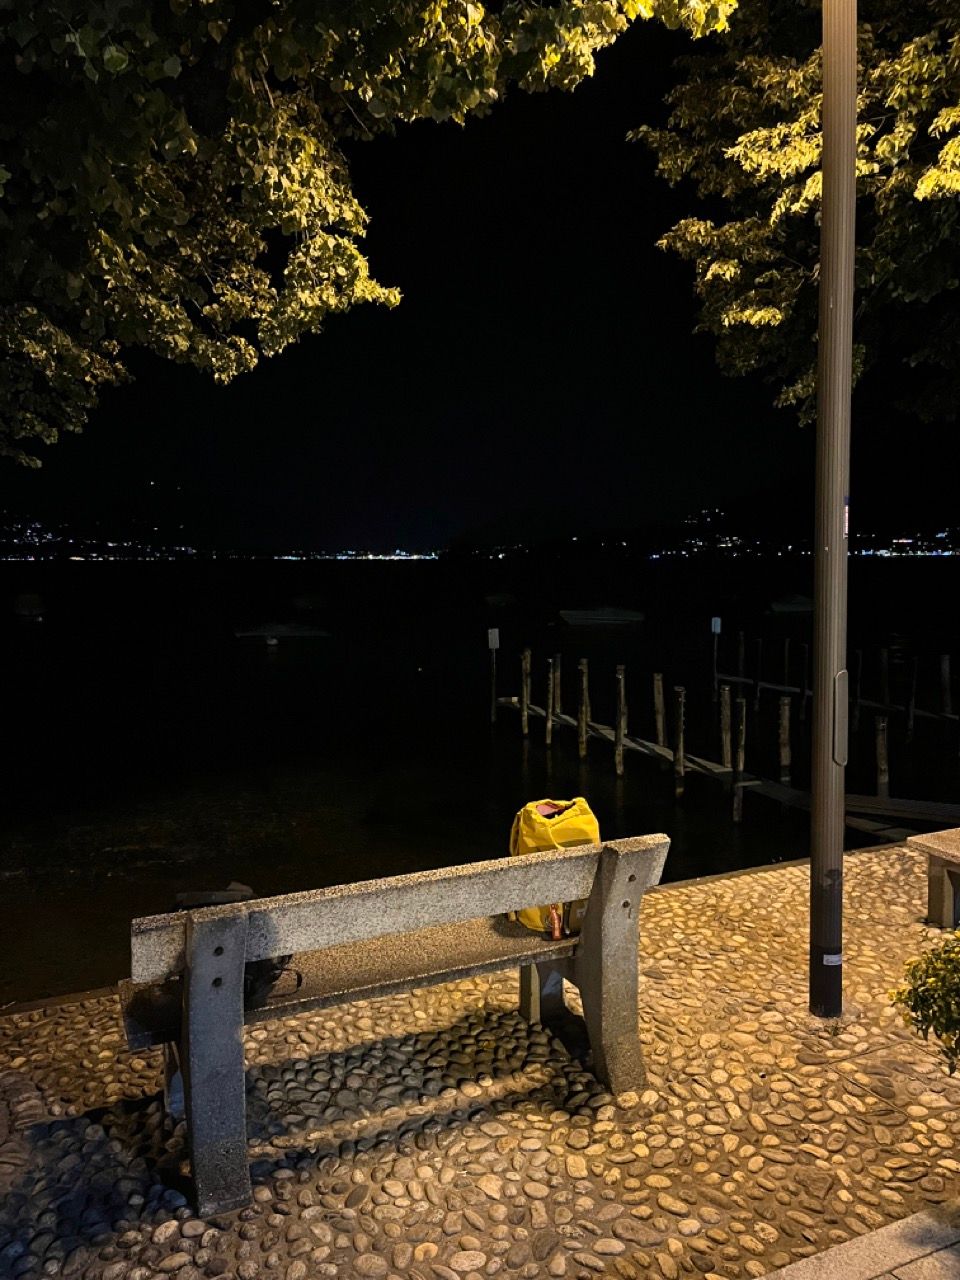 A picture of the side of a lake at night. In the foreground, a cement bench seen from behind with a yellow backpack on it, next to a tree that frames the picture at the top. Beyond it, a small pier with wooden poles stretches into the pitch balck water. In the distance the lights of a town on the other side of the lake.